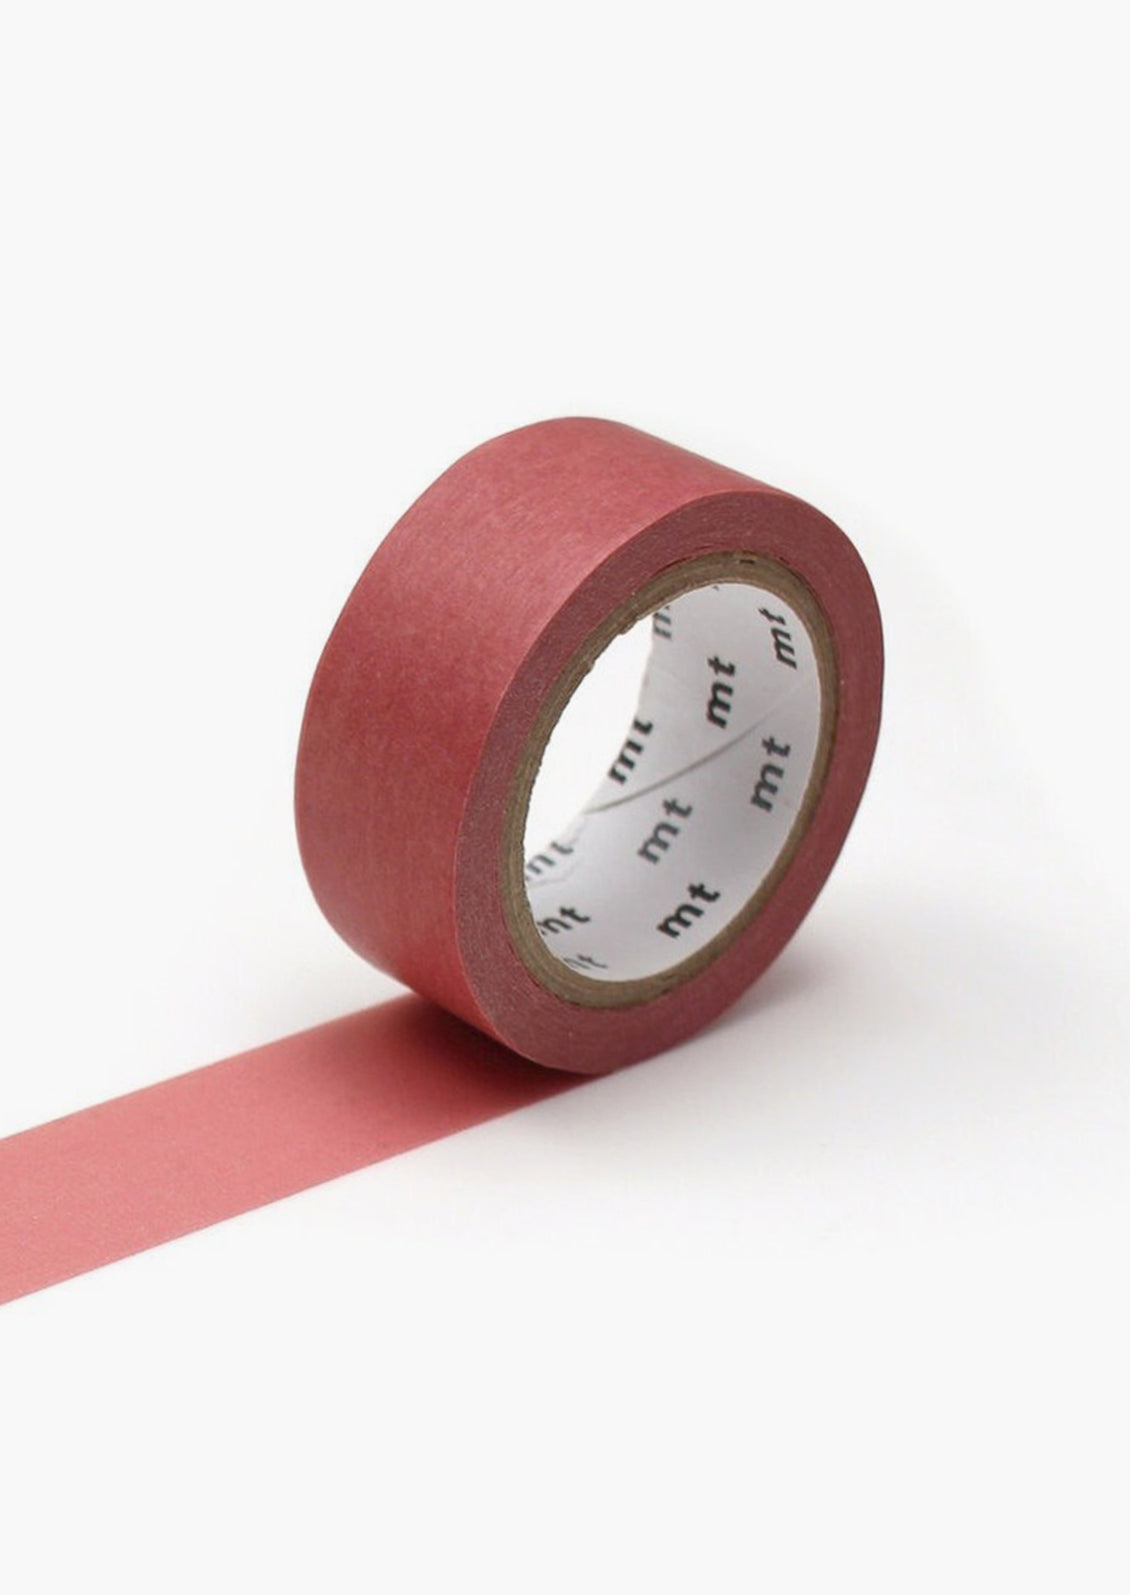 A roll of washi tape in redwood color.